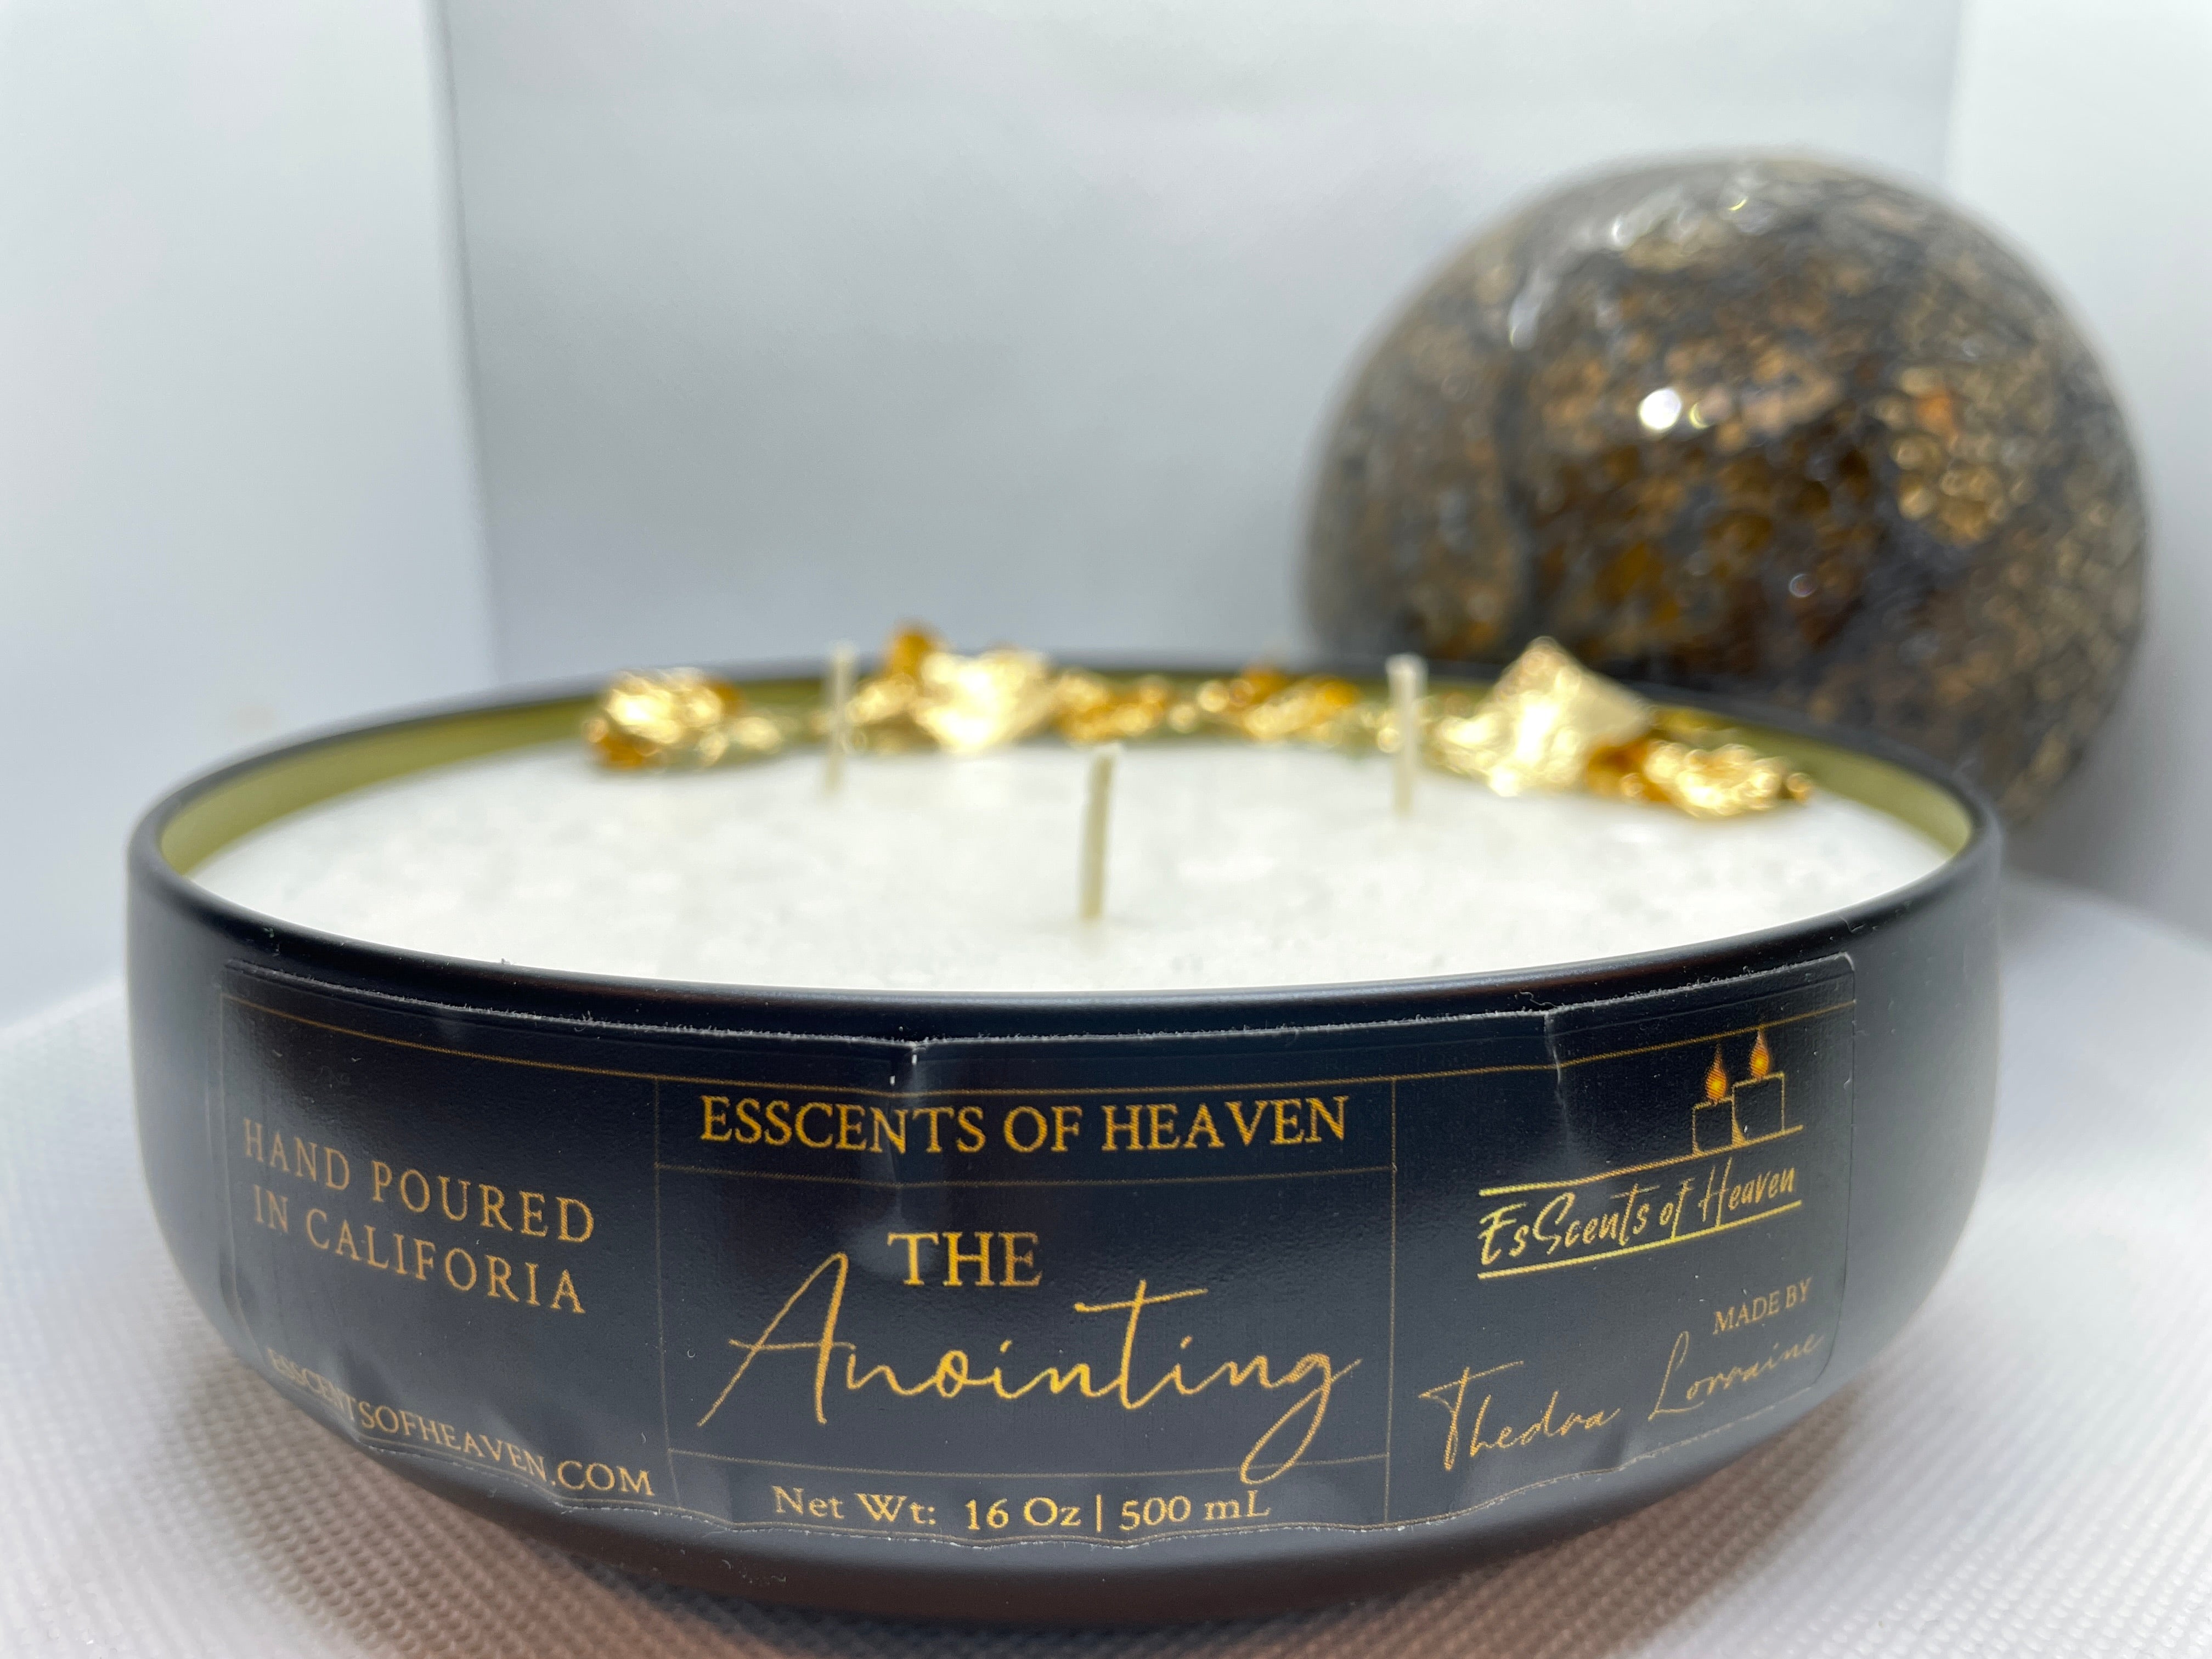 “The Anointing” Gold Leaf Candle